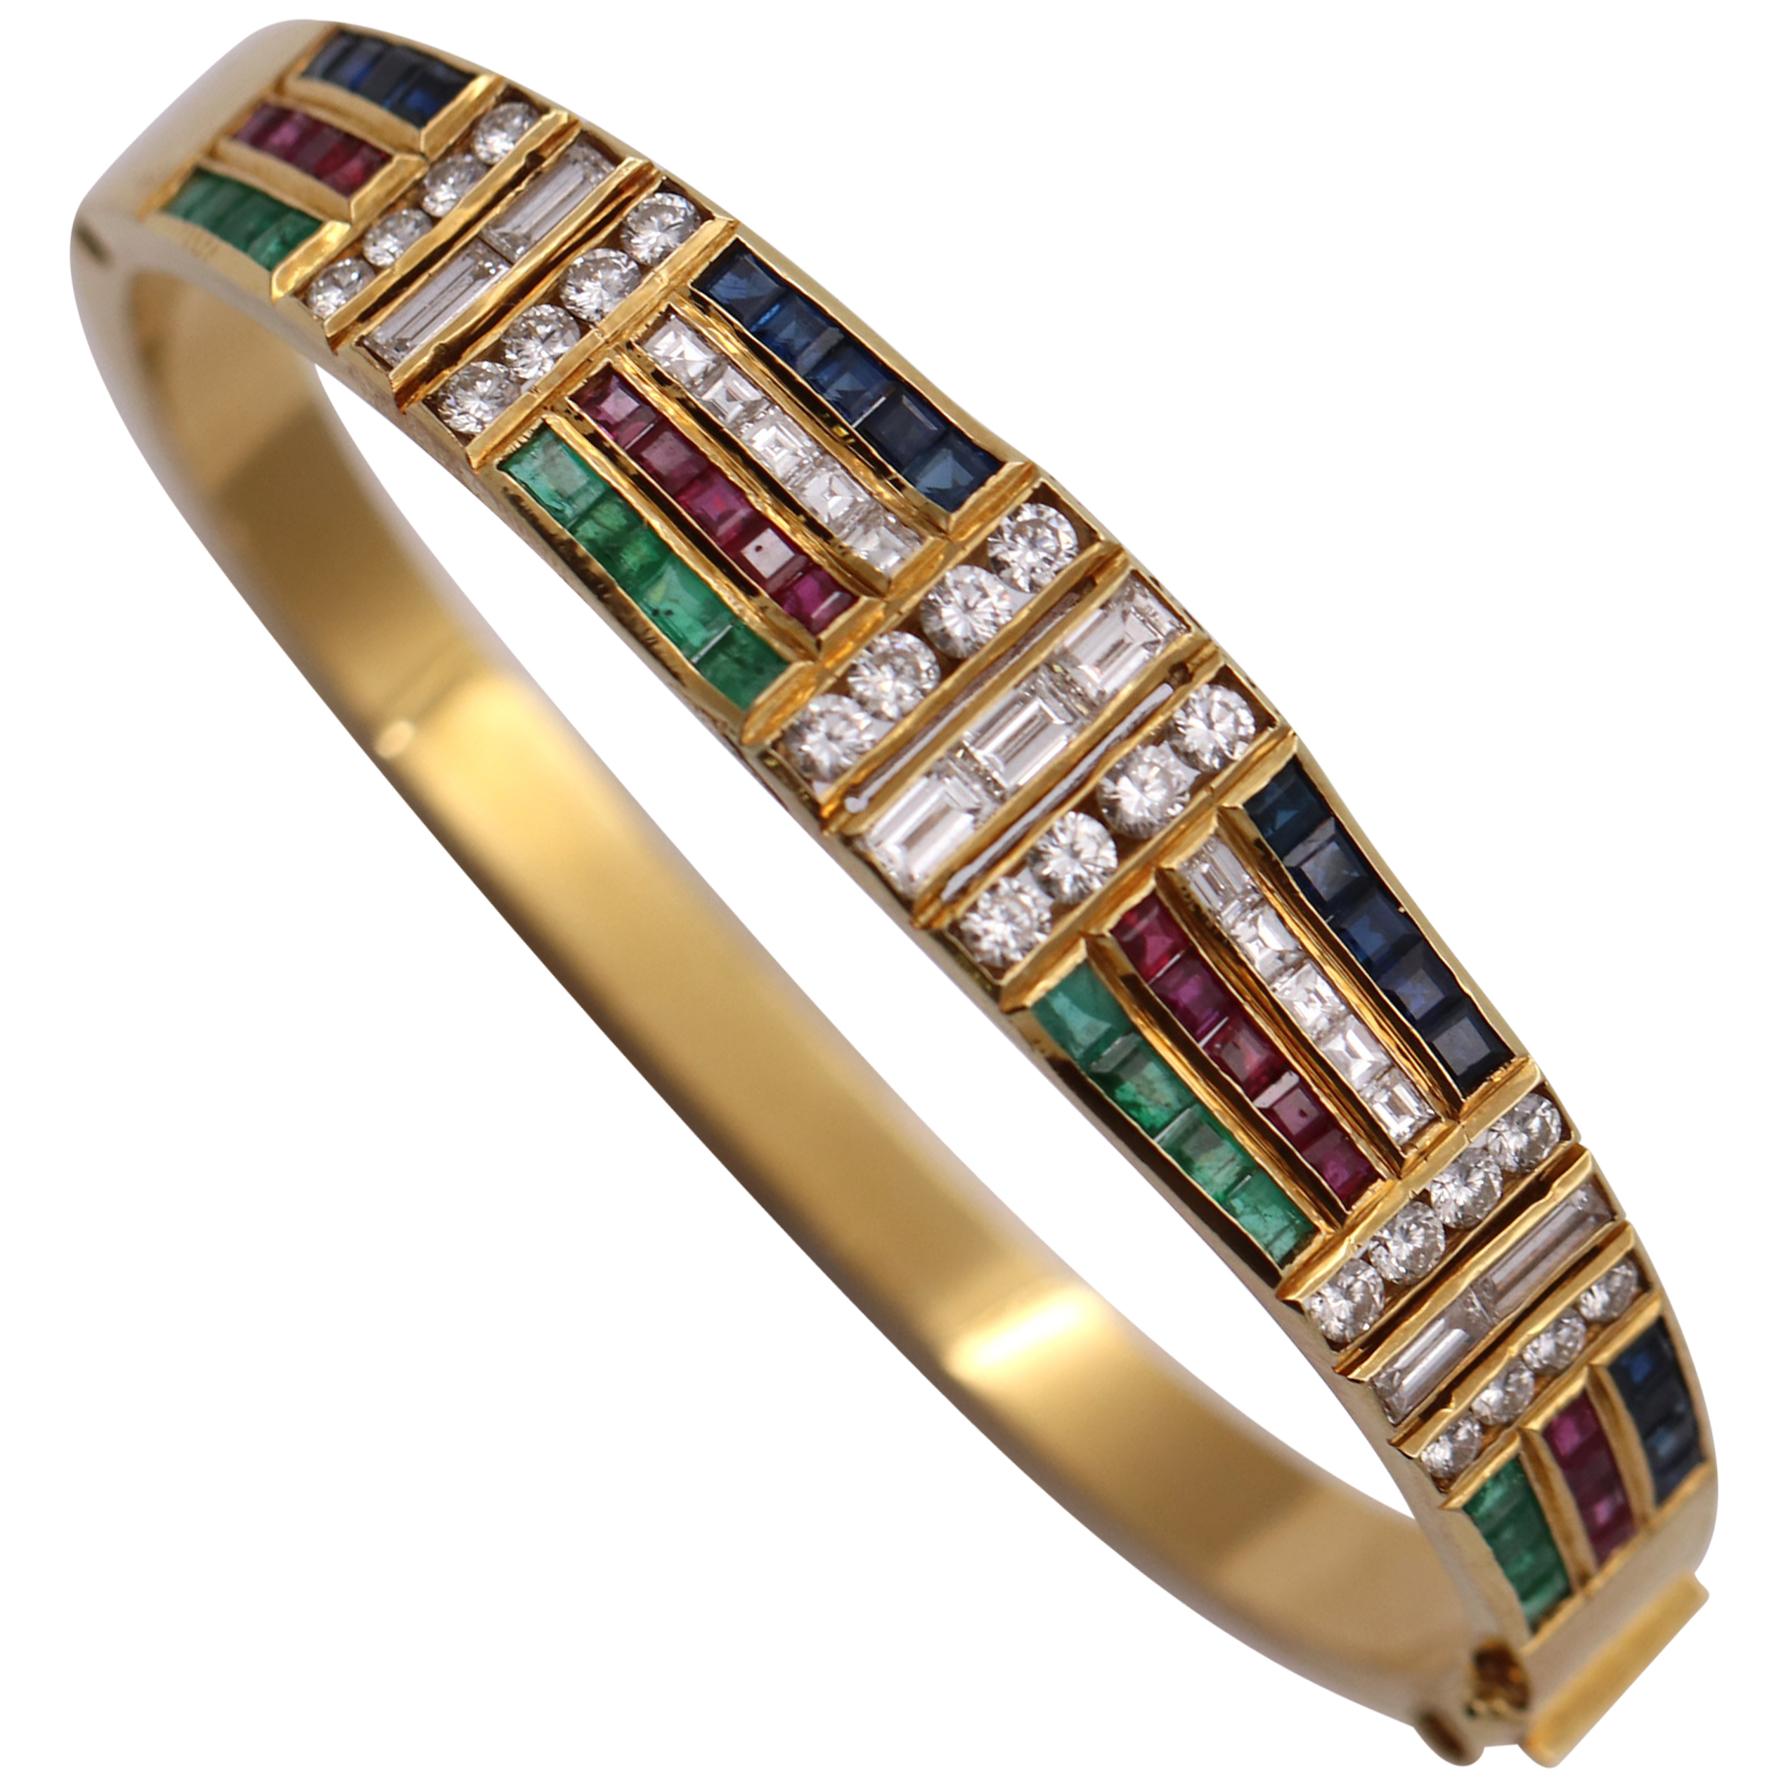 Bangle Bracelet with a Rainbow of Colored Stones and Diamonds